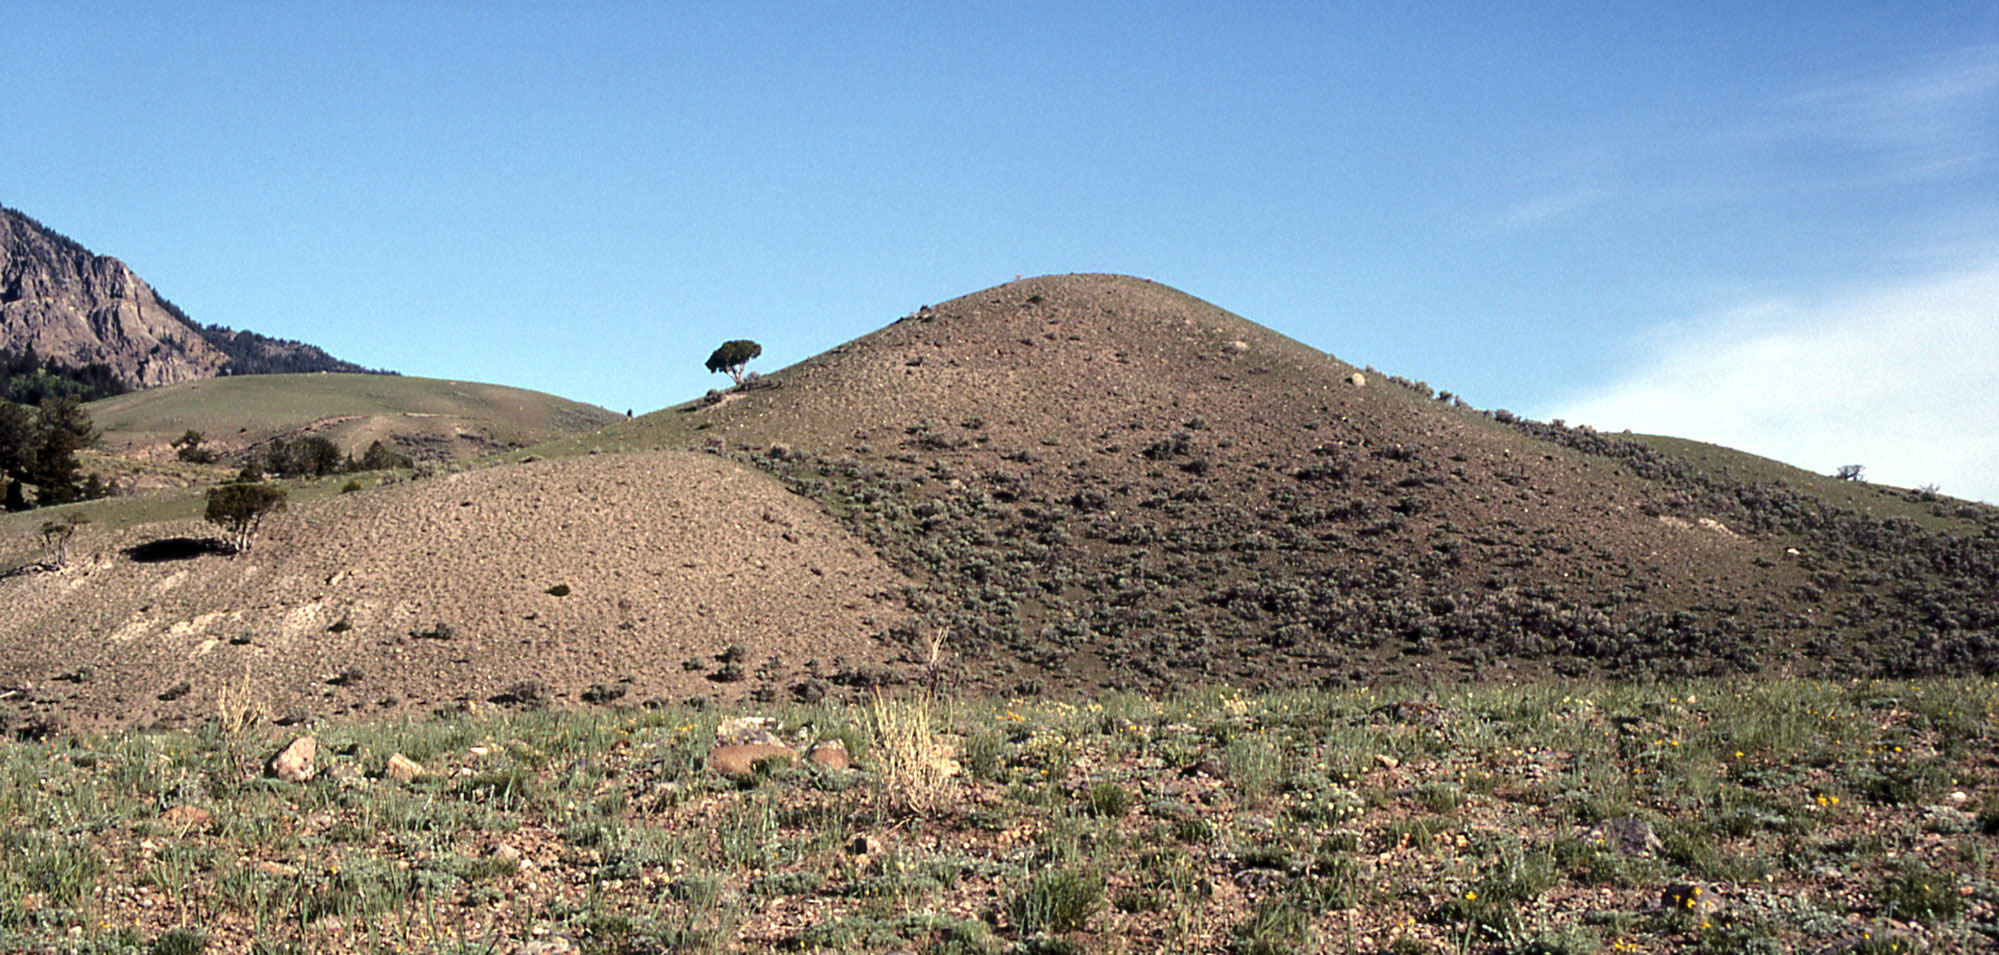 Photograph of Dude Hill, Yellowstone National Park. The photo shows a low, rounded hill that is sparsely vegetated. A flat landscape with tufts of grass occurs in the foreground. In the left background, another hill and a rocky cliff rise.